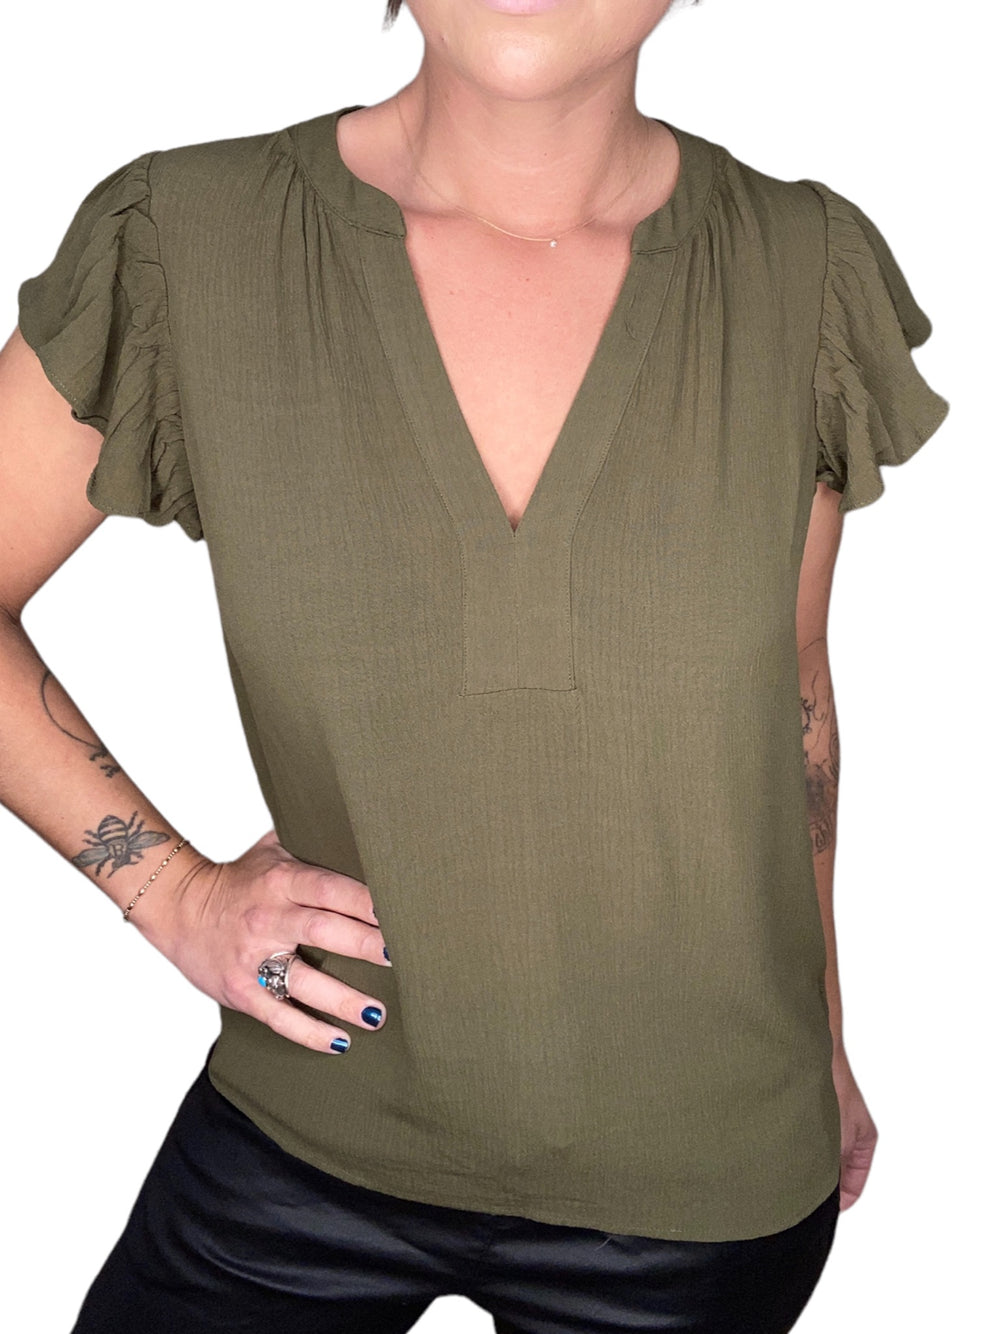 QUAY V-NECK RUFFLE SLEEVE TOP -  OLIVE - Kingfisher Road - Online Boutique